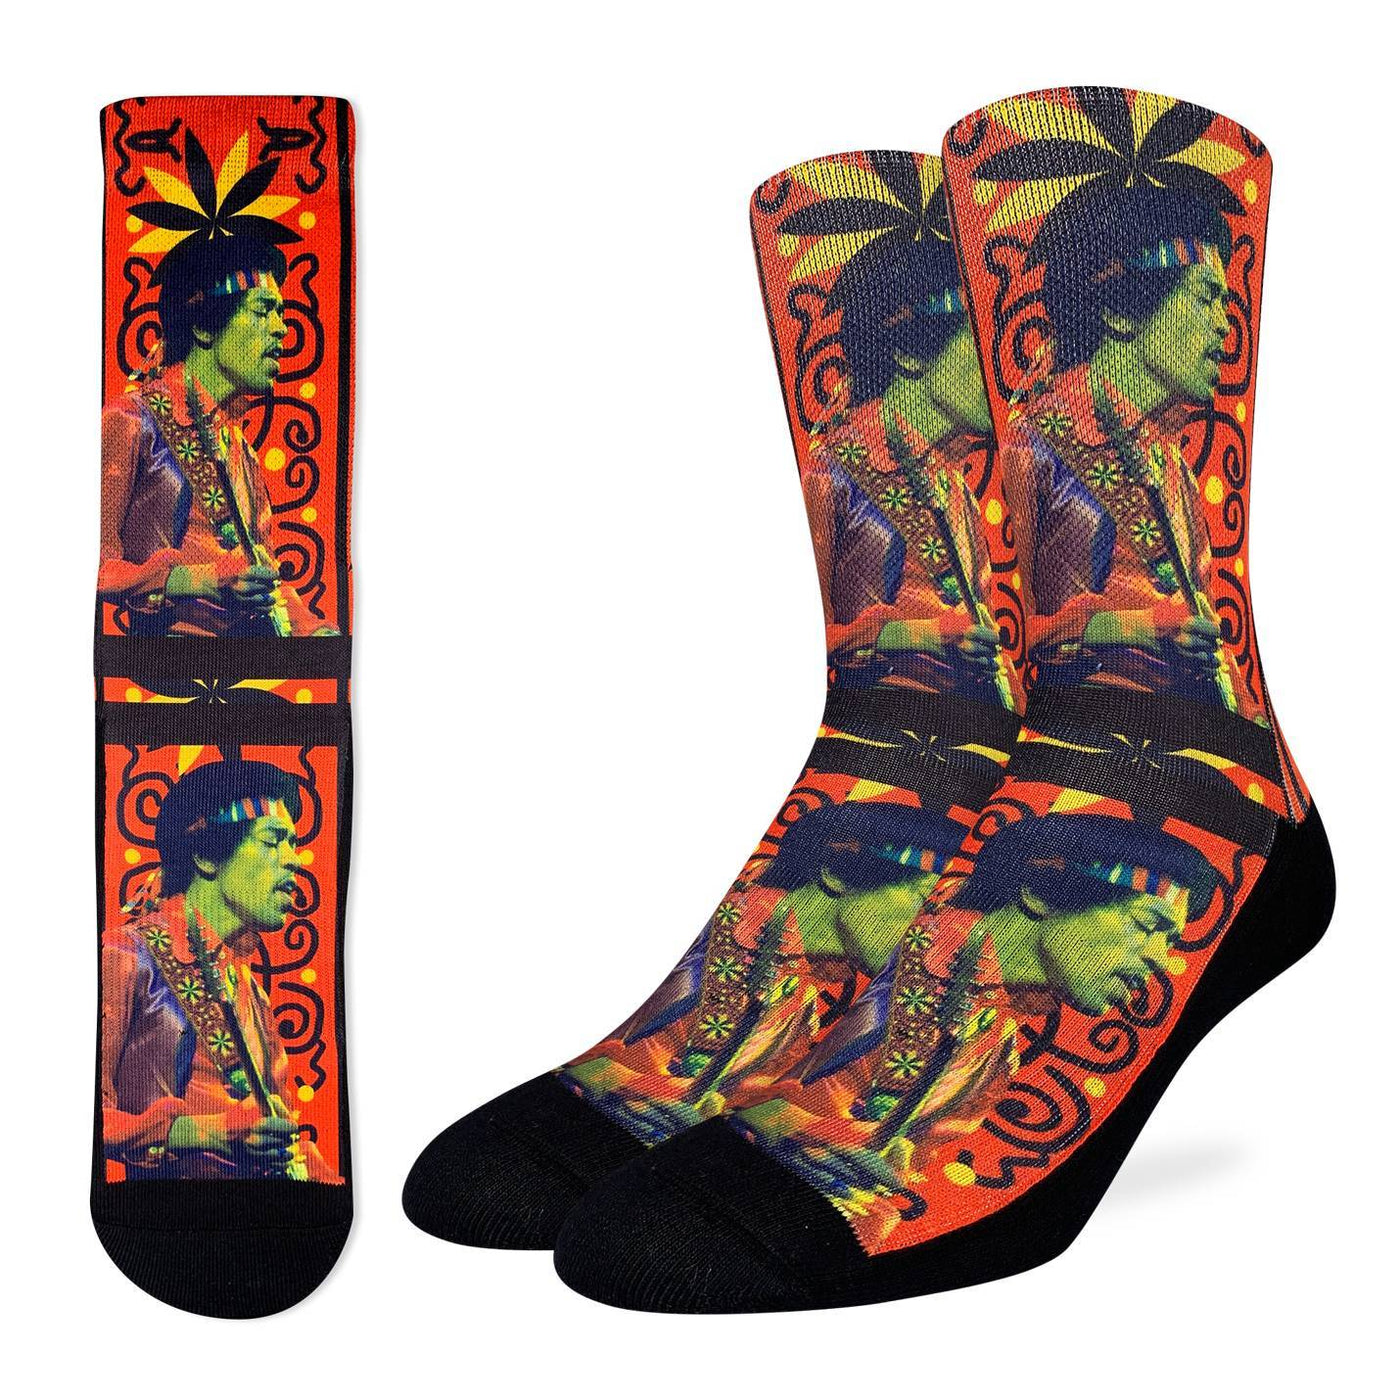 Jimi Hendrix Guitar Strap Active Fit Socks by Good Luck Sock - Large